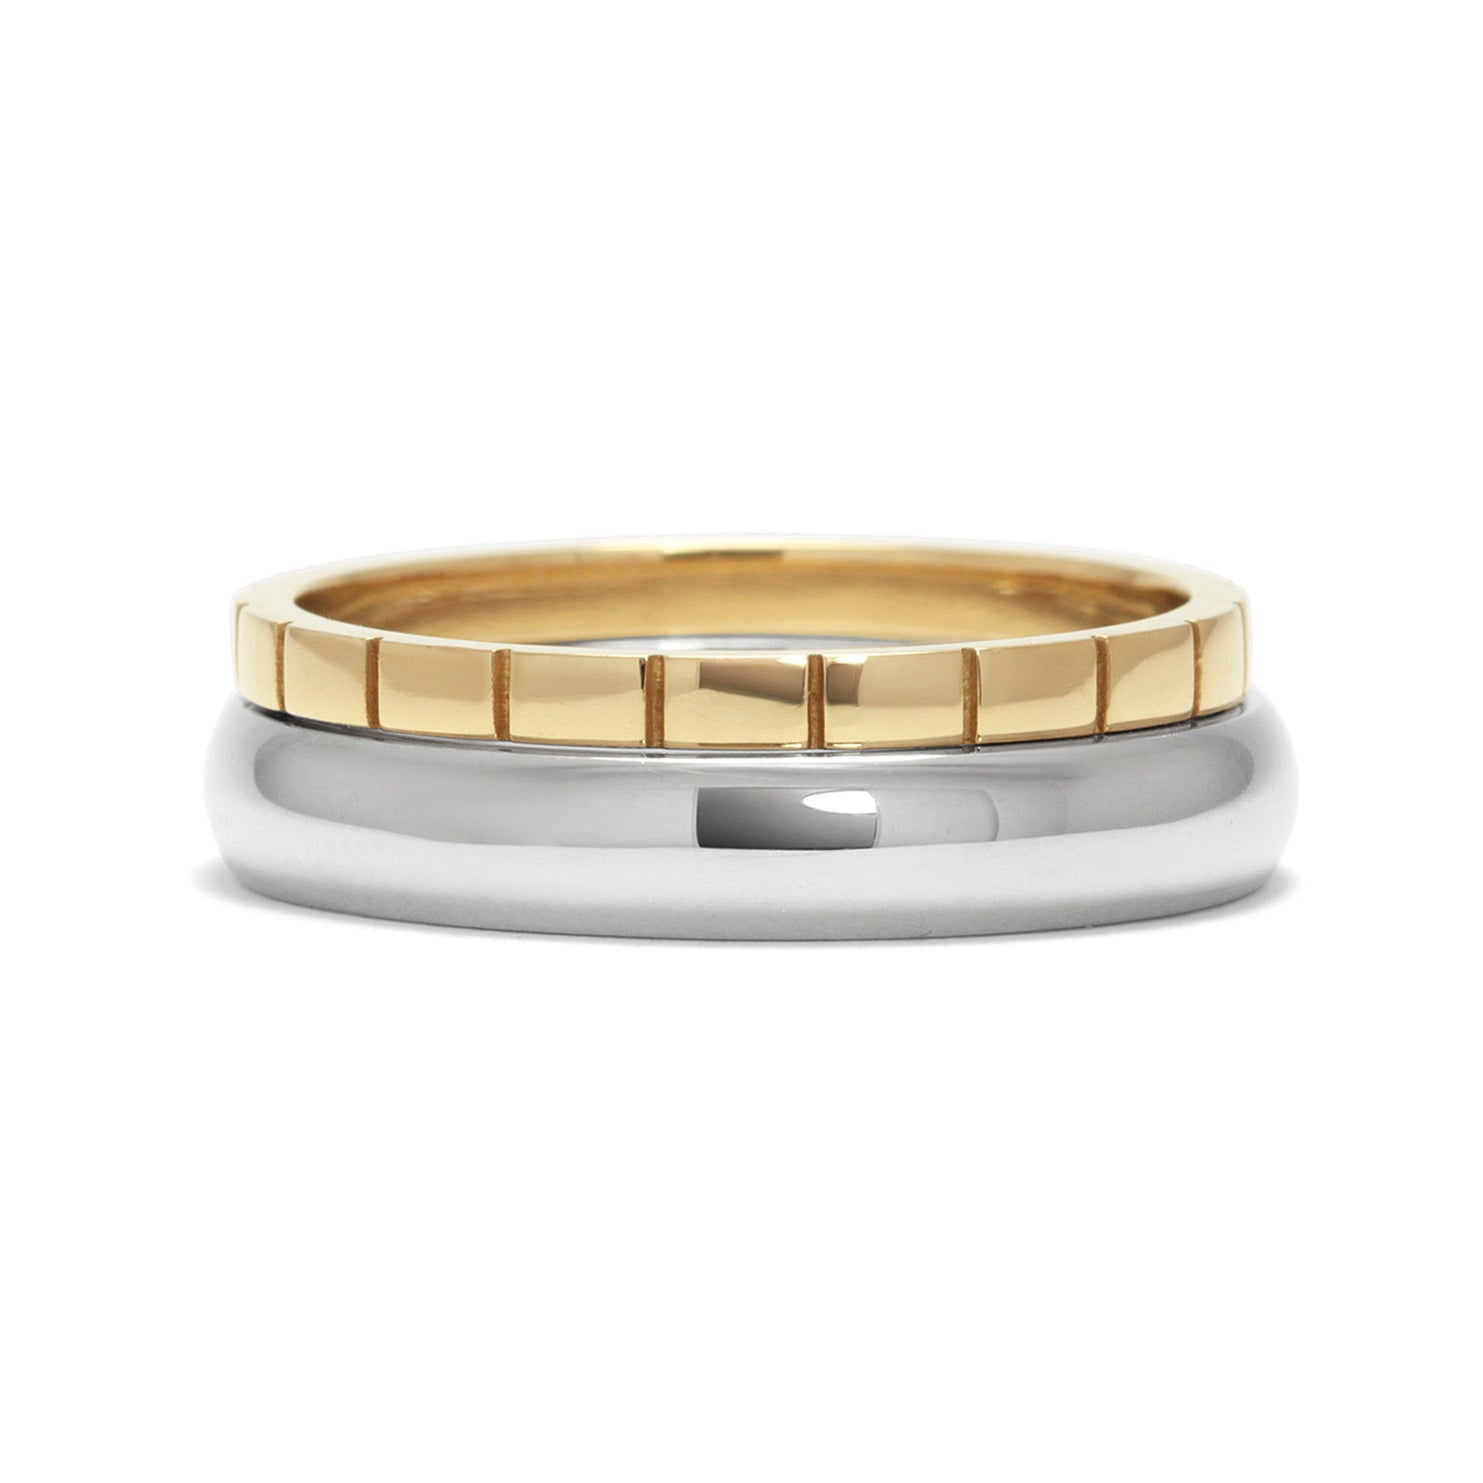 Freedom Ethical Gold Ring: 2 Bands